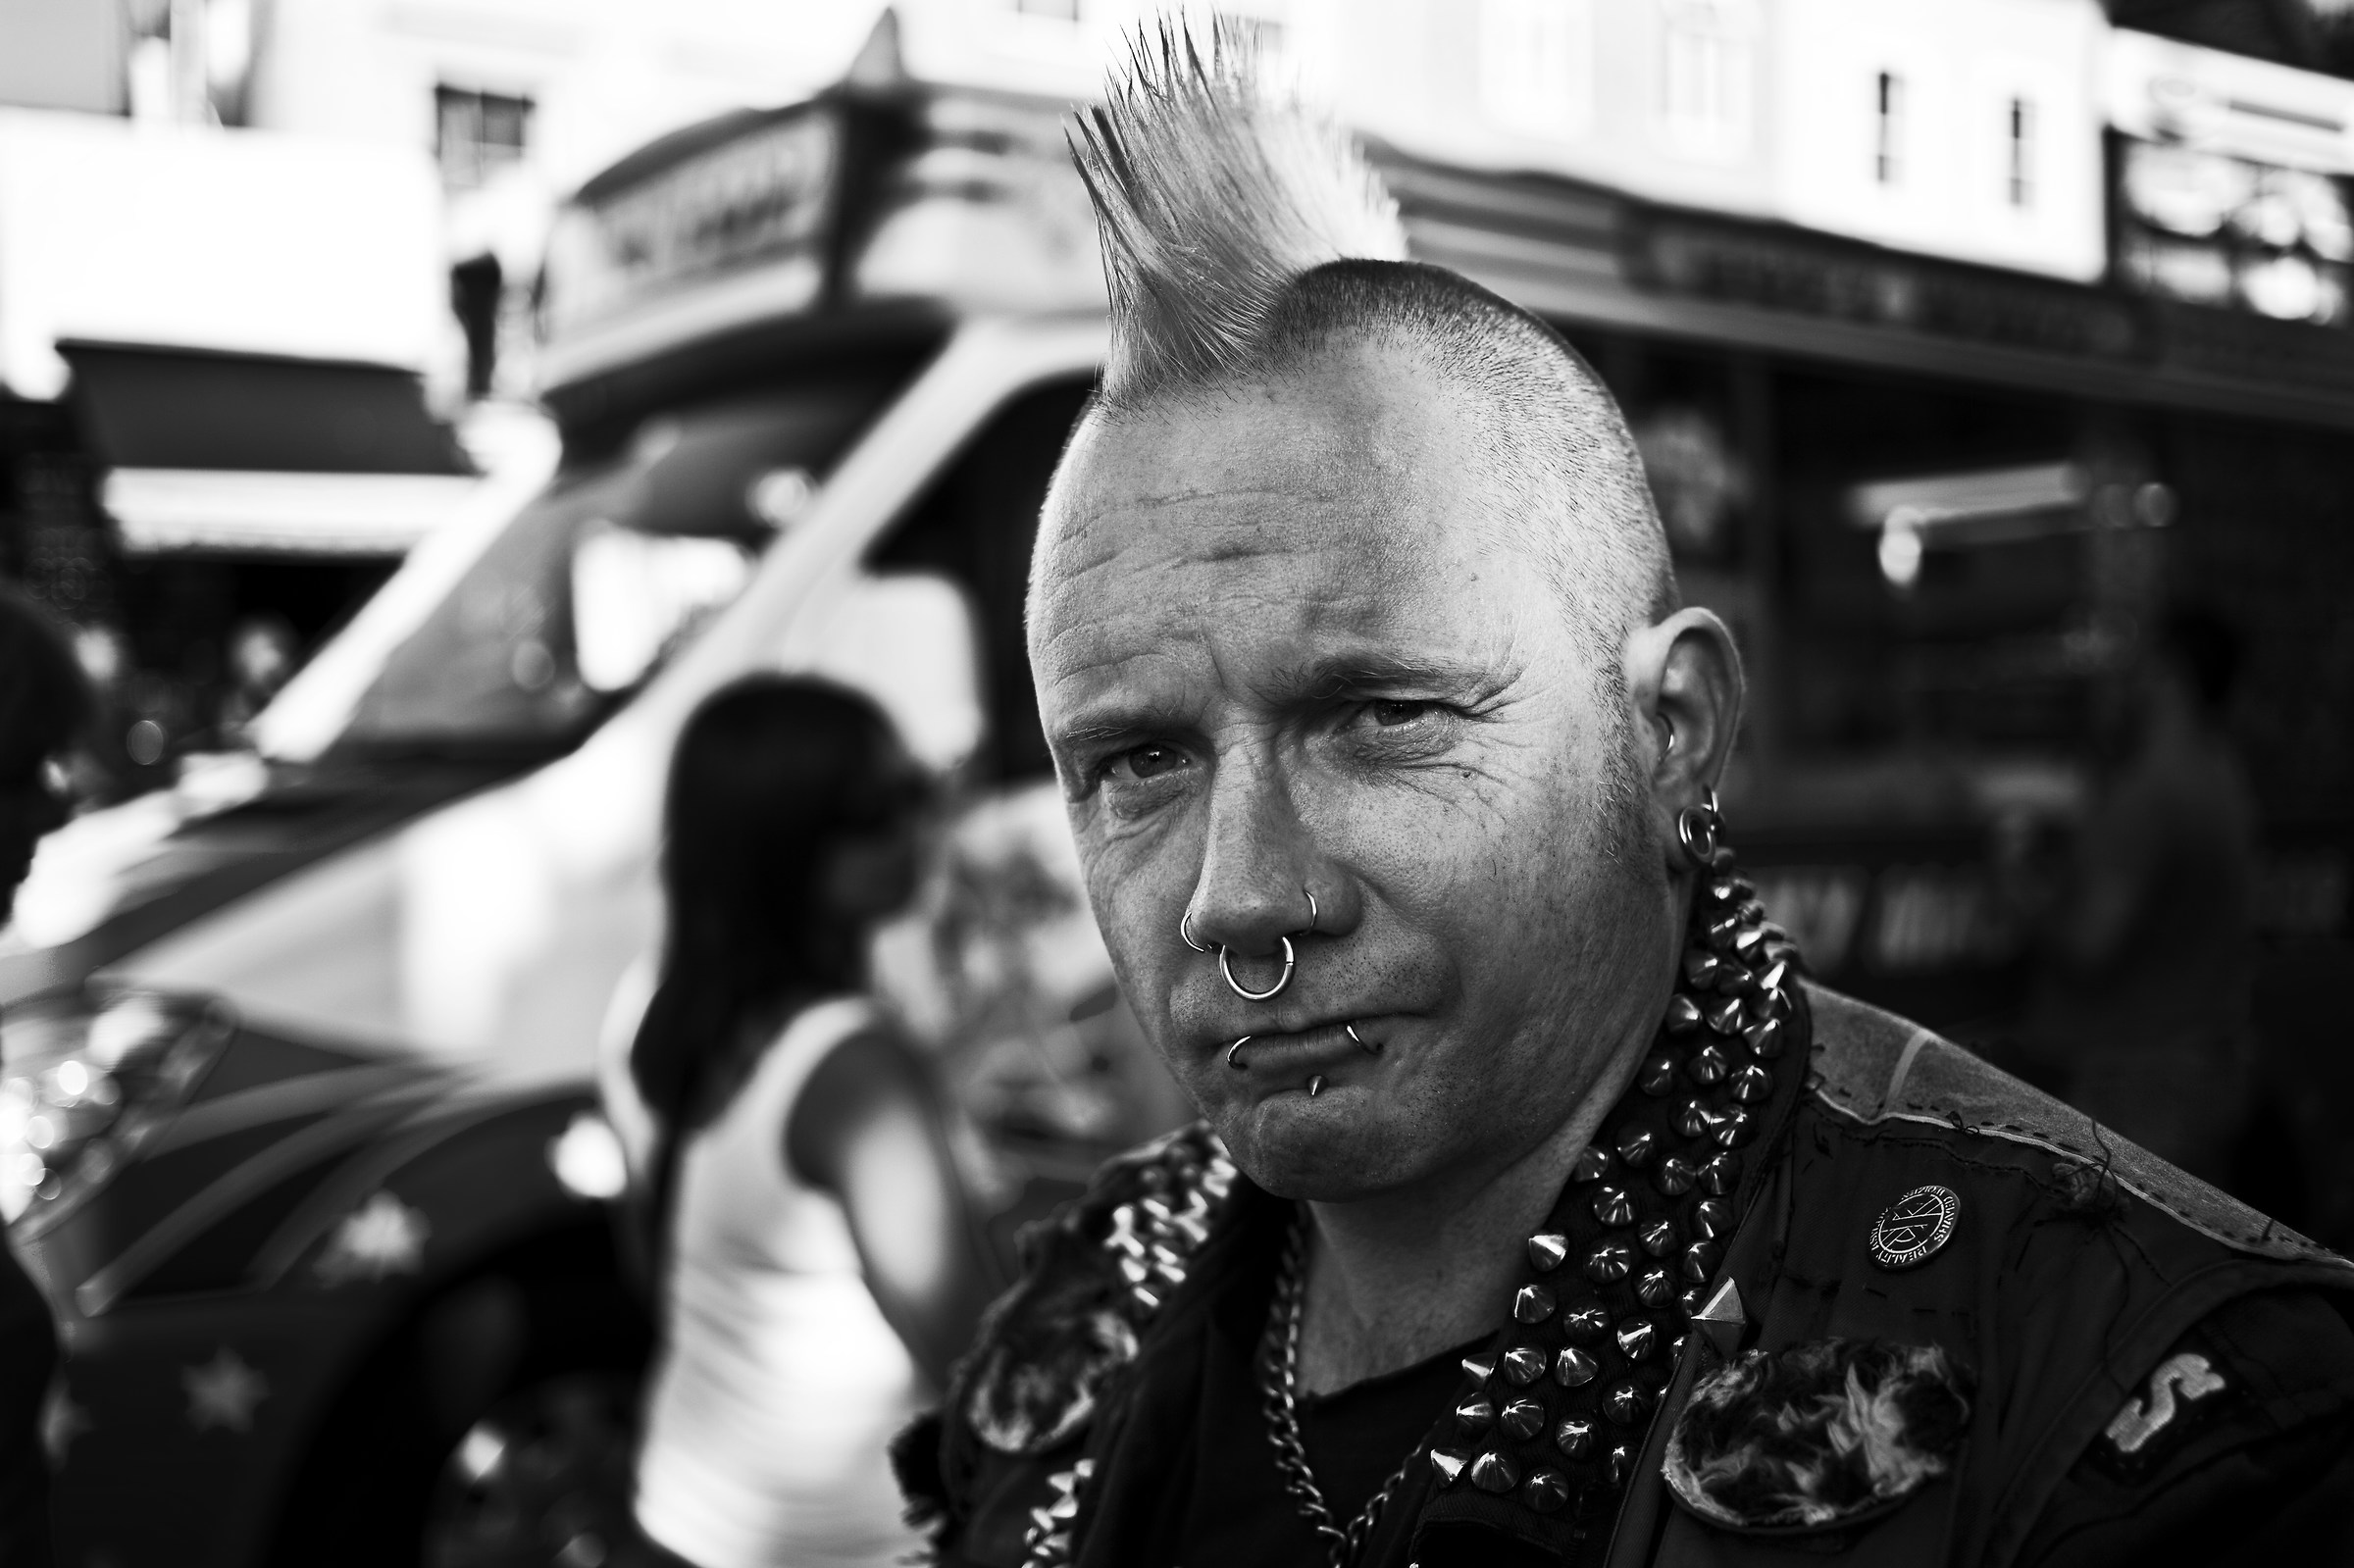 marck old punk in camden town...